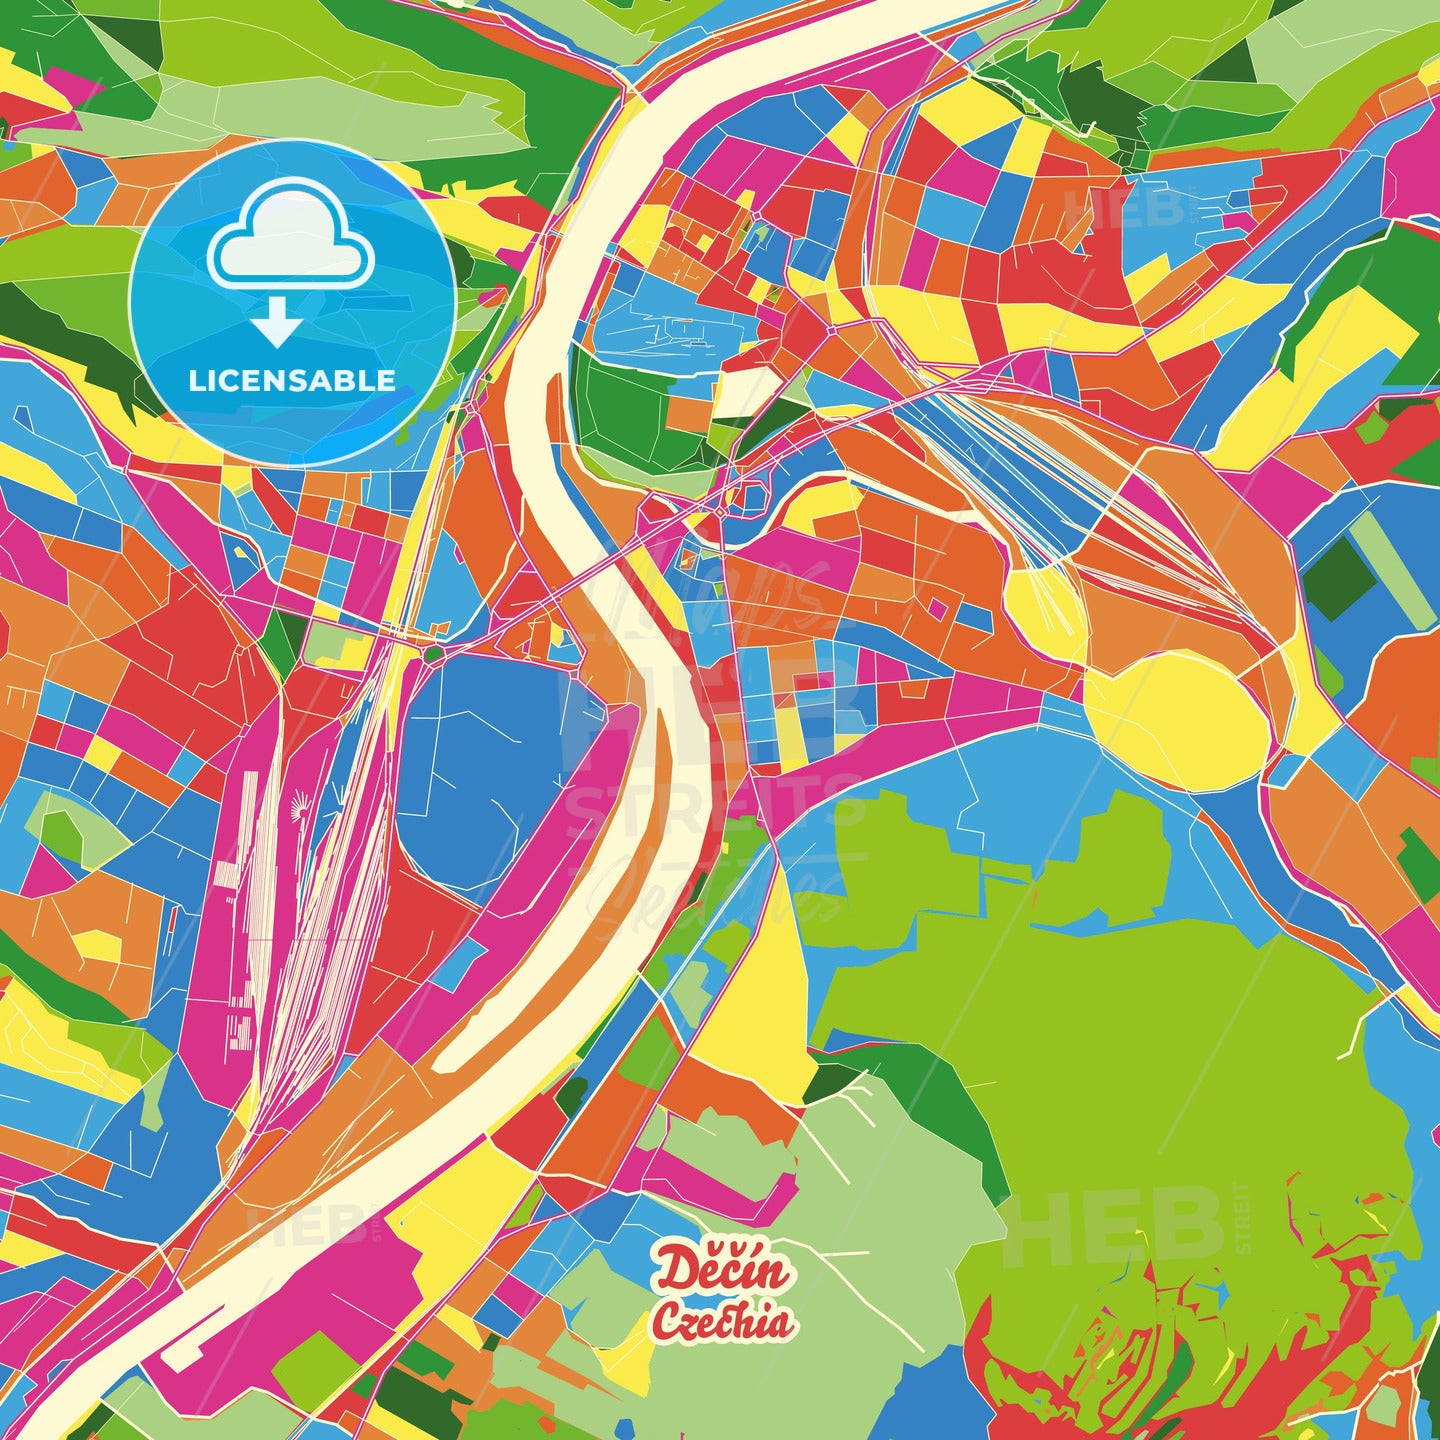 Děčín, Czechia Crazy Colorful Street Map Poster Template - HEBSTREITS Sketches